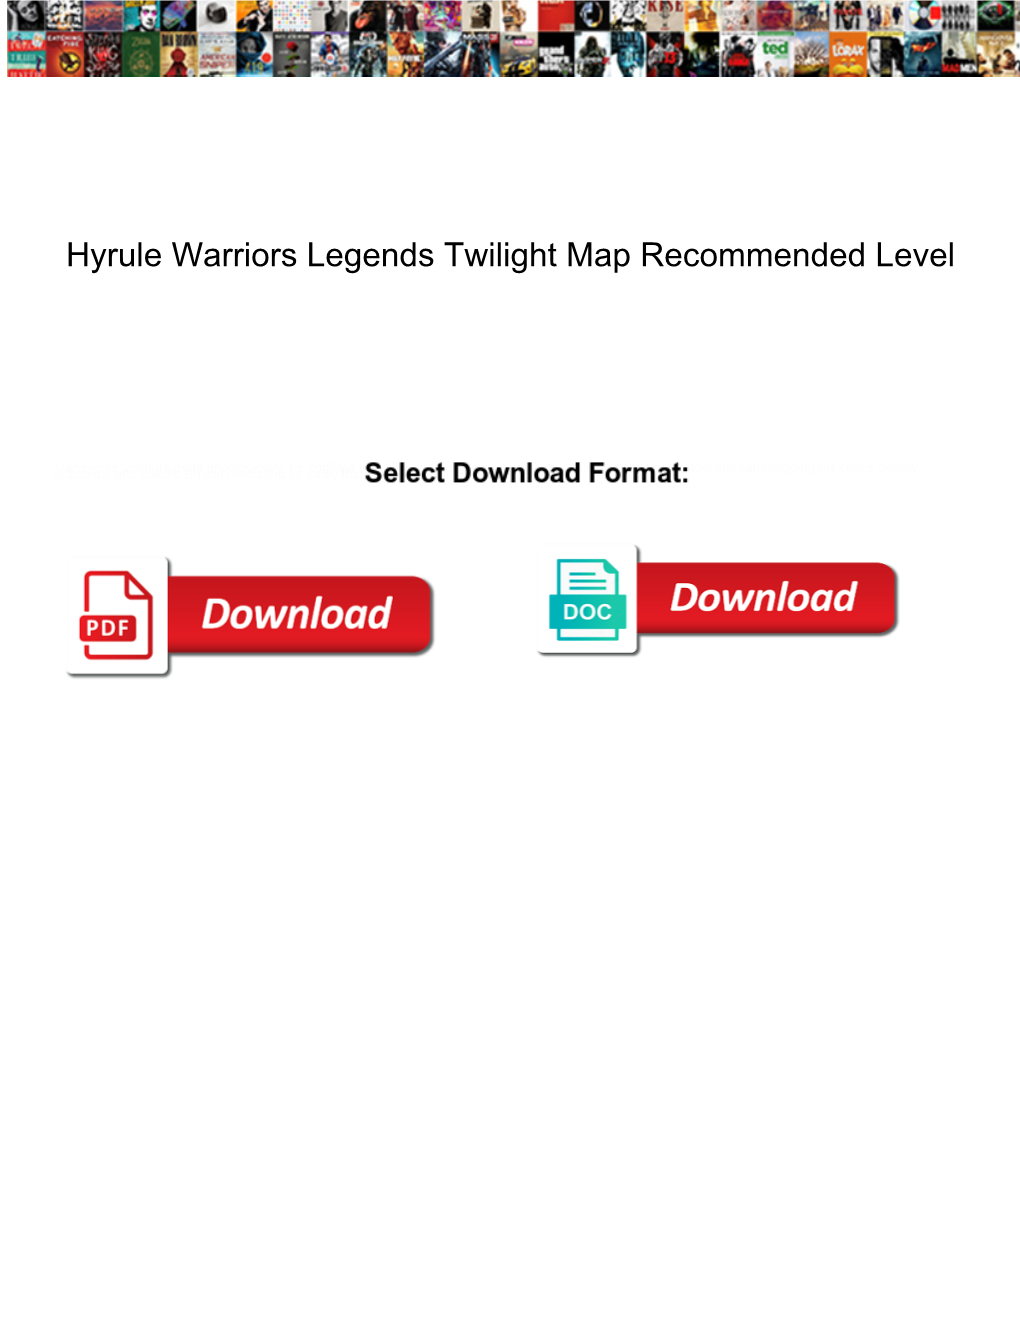 Hyrule Warriors Legends Twilight Map Recommended Level